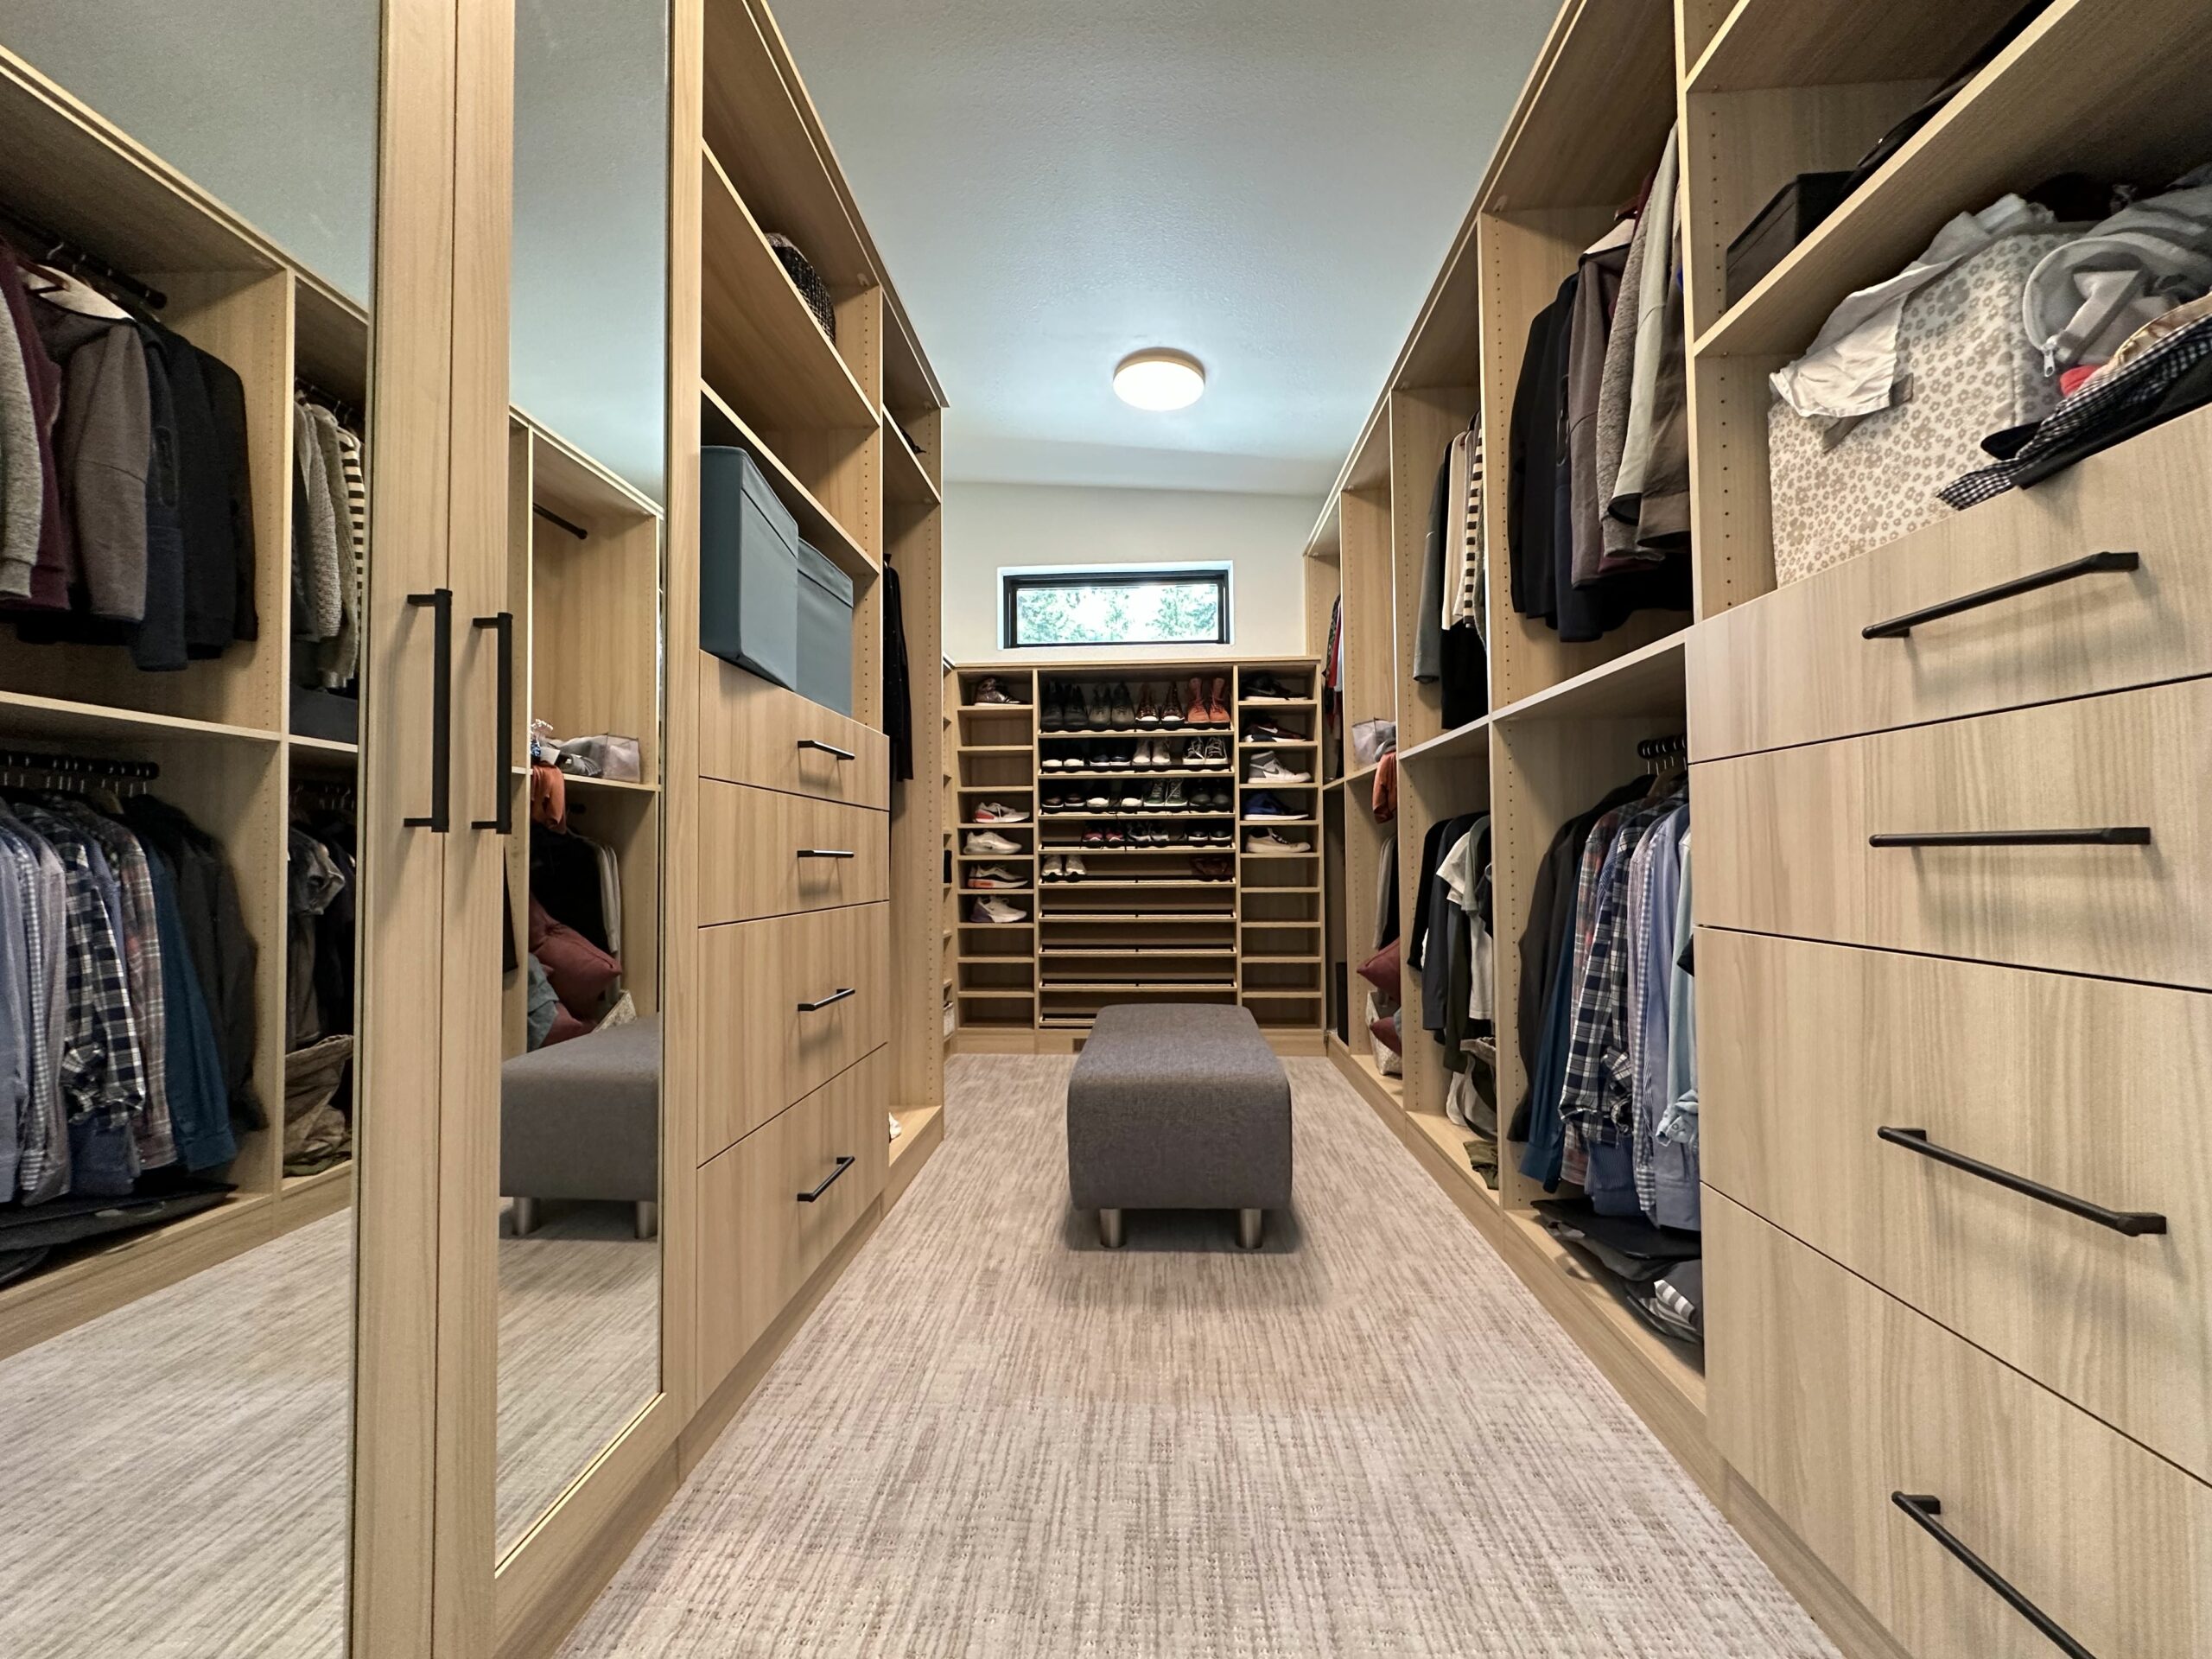 Light woodgrain walk-in closet with drawers, lots of shoe storage, drawers, jewelry inserts, tilt out hampers, and more.